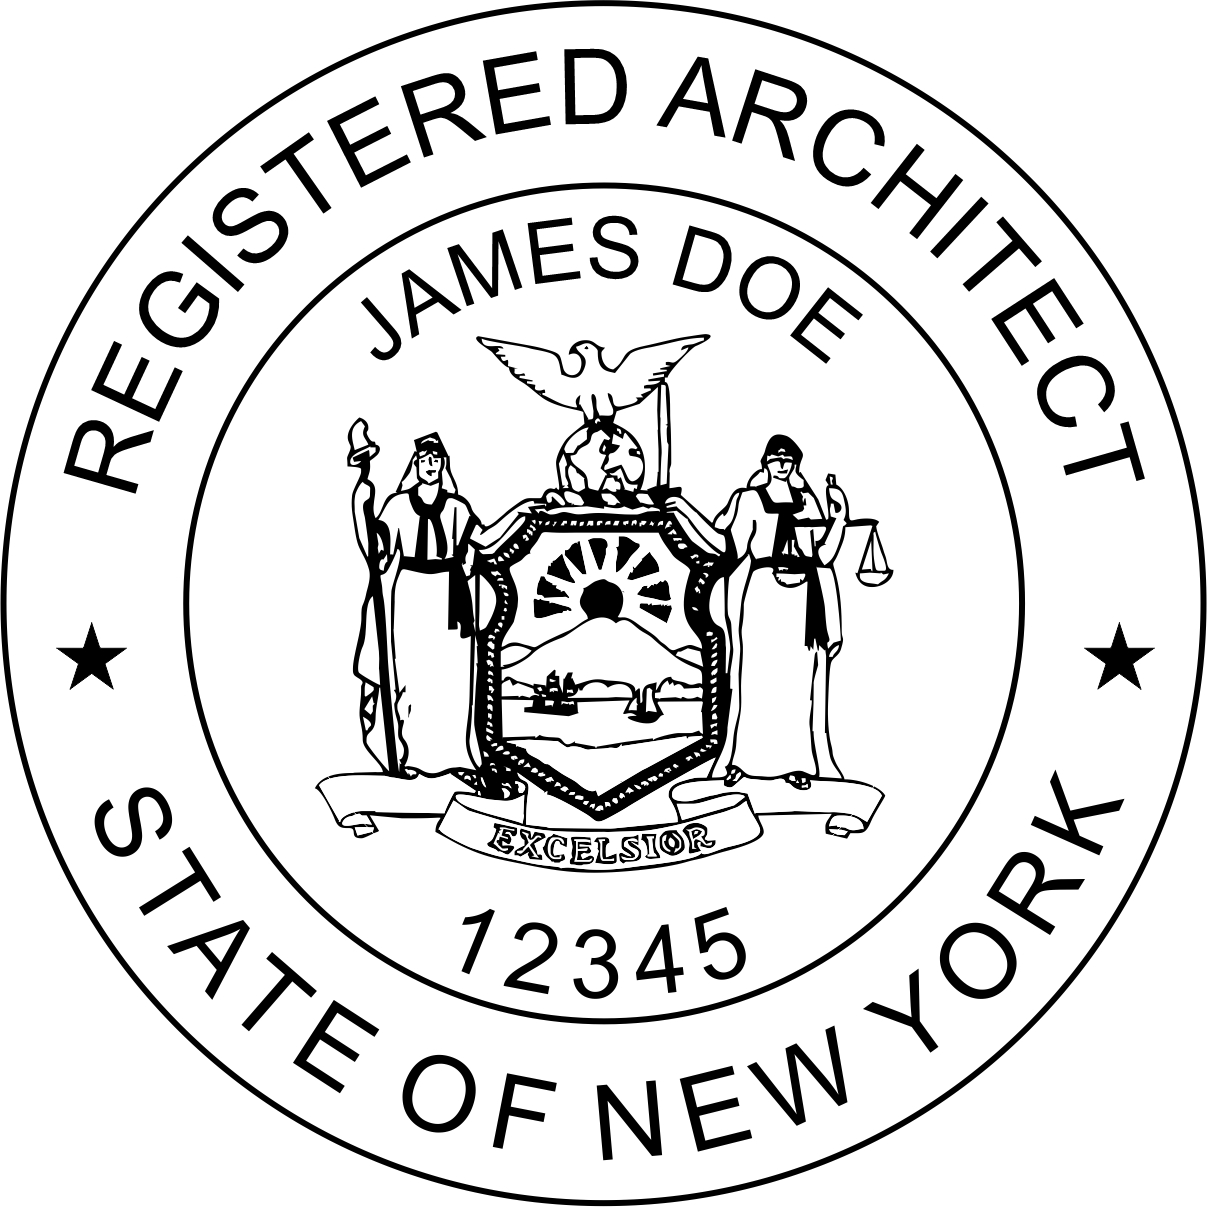 Architect Seal - Desk Top Style - New York